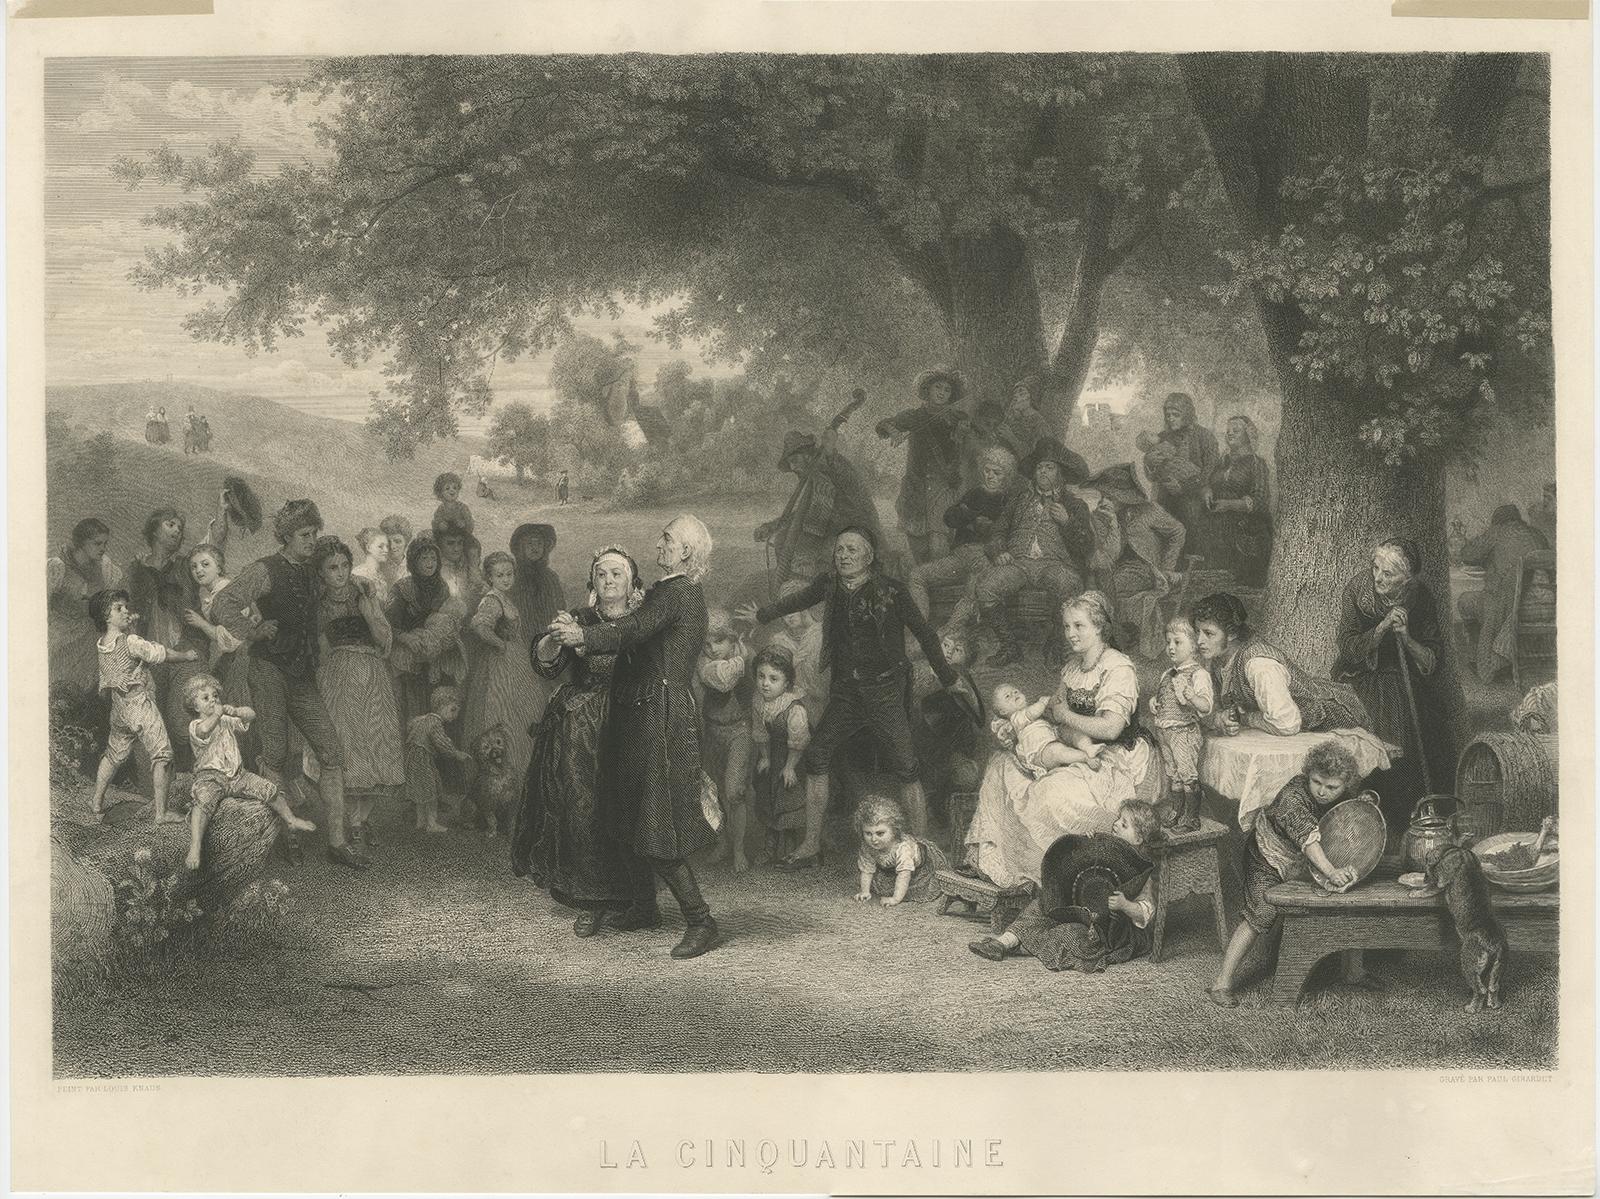 Antique print titled 'La Cinquantaine'. 

This print shows an elderly couple, celebrating their fiftieth wedding anniversary, dancing under a tree in a landscape surrounded by their family and friends. 

Artists and engravers: Engraved by Paul